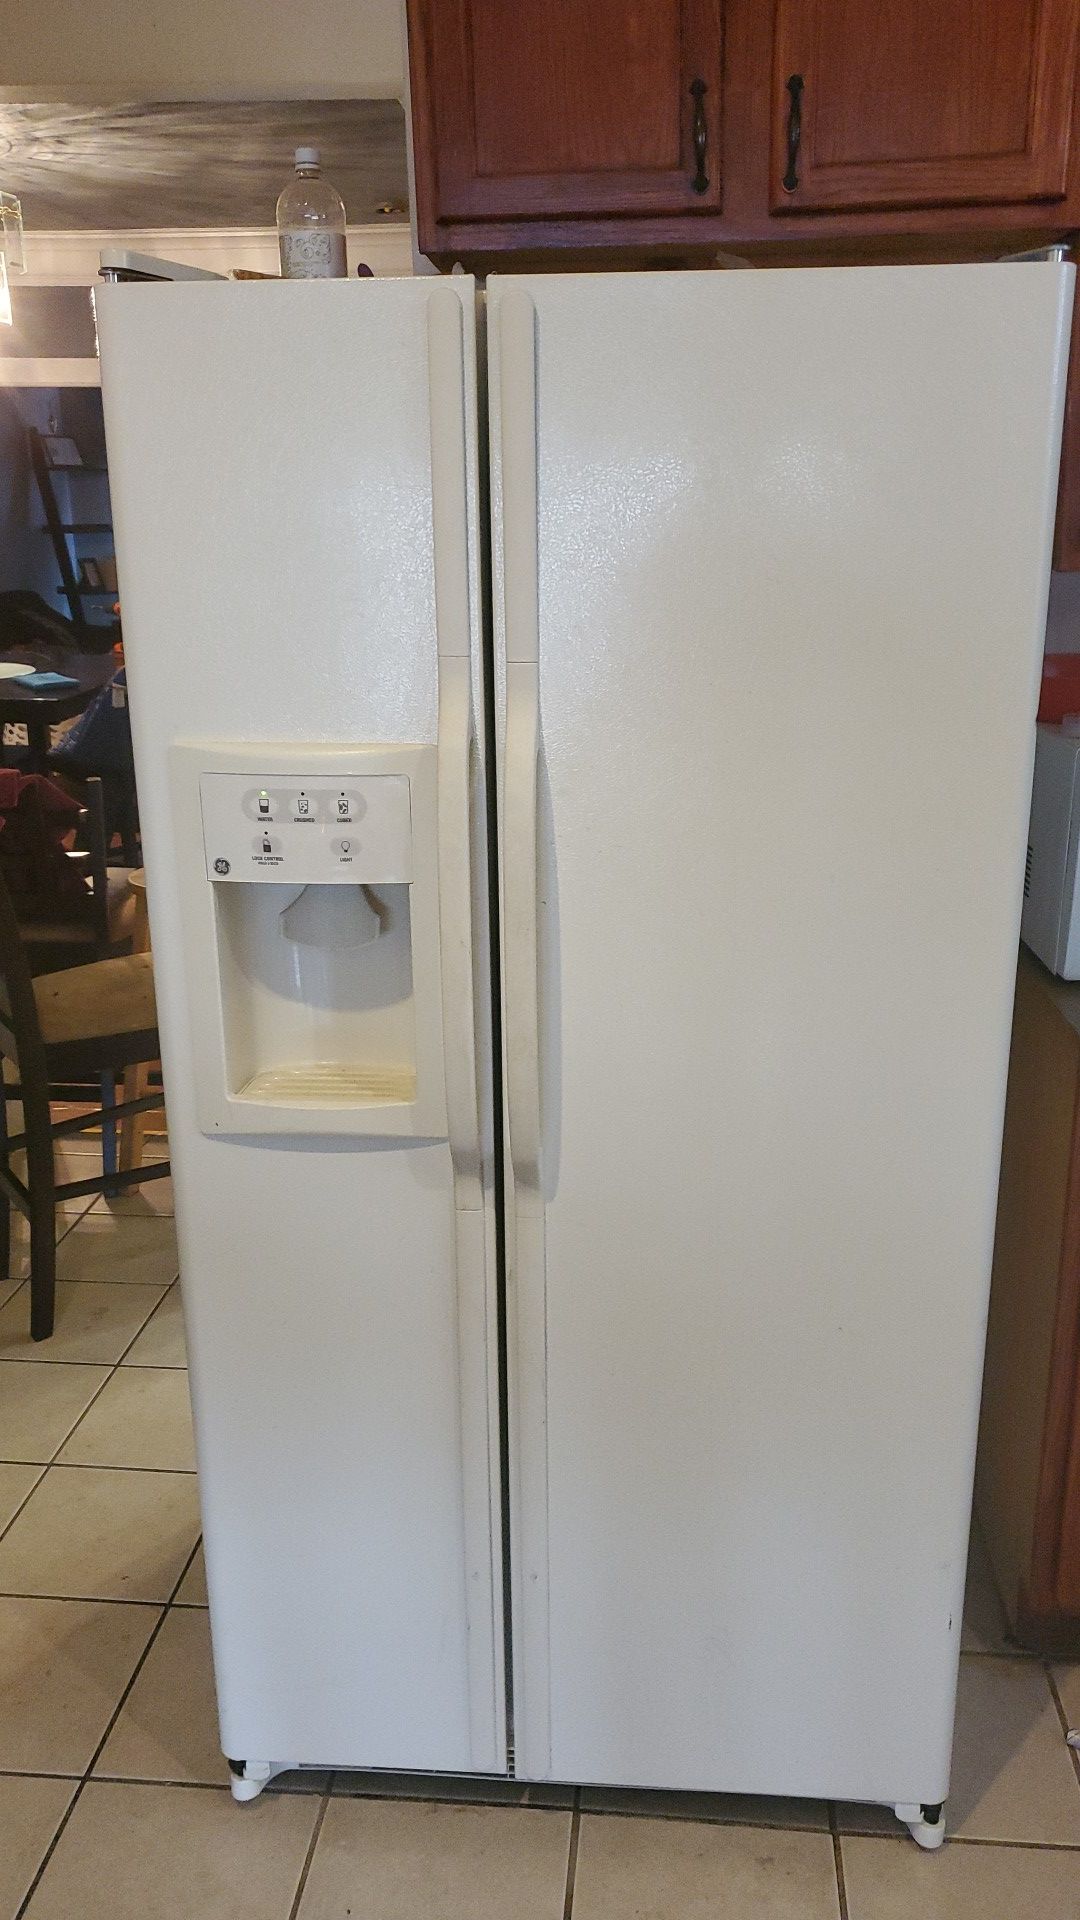 GE refrigerator. Works fine for a used model.